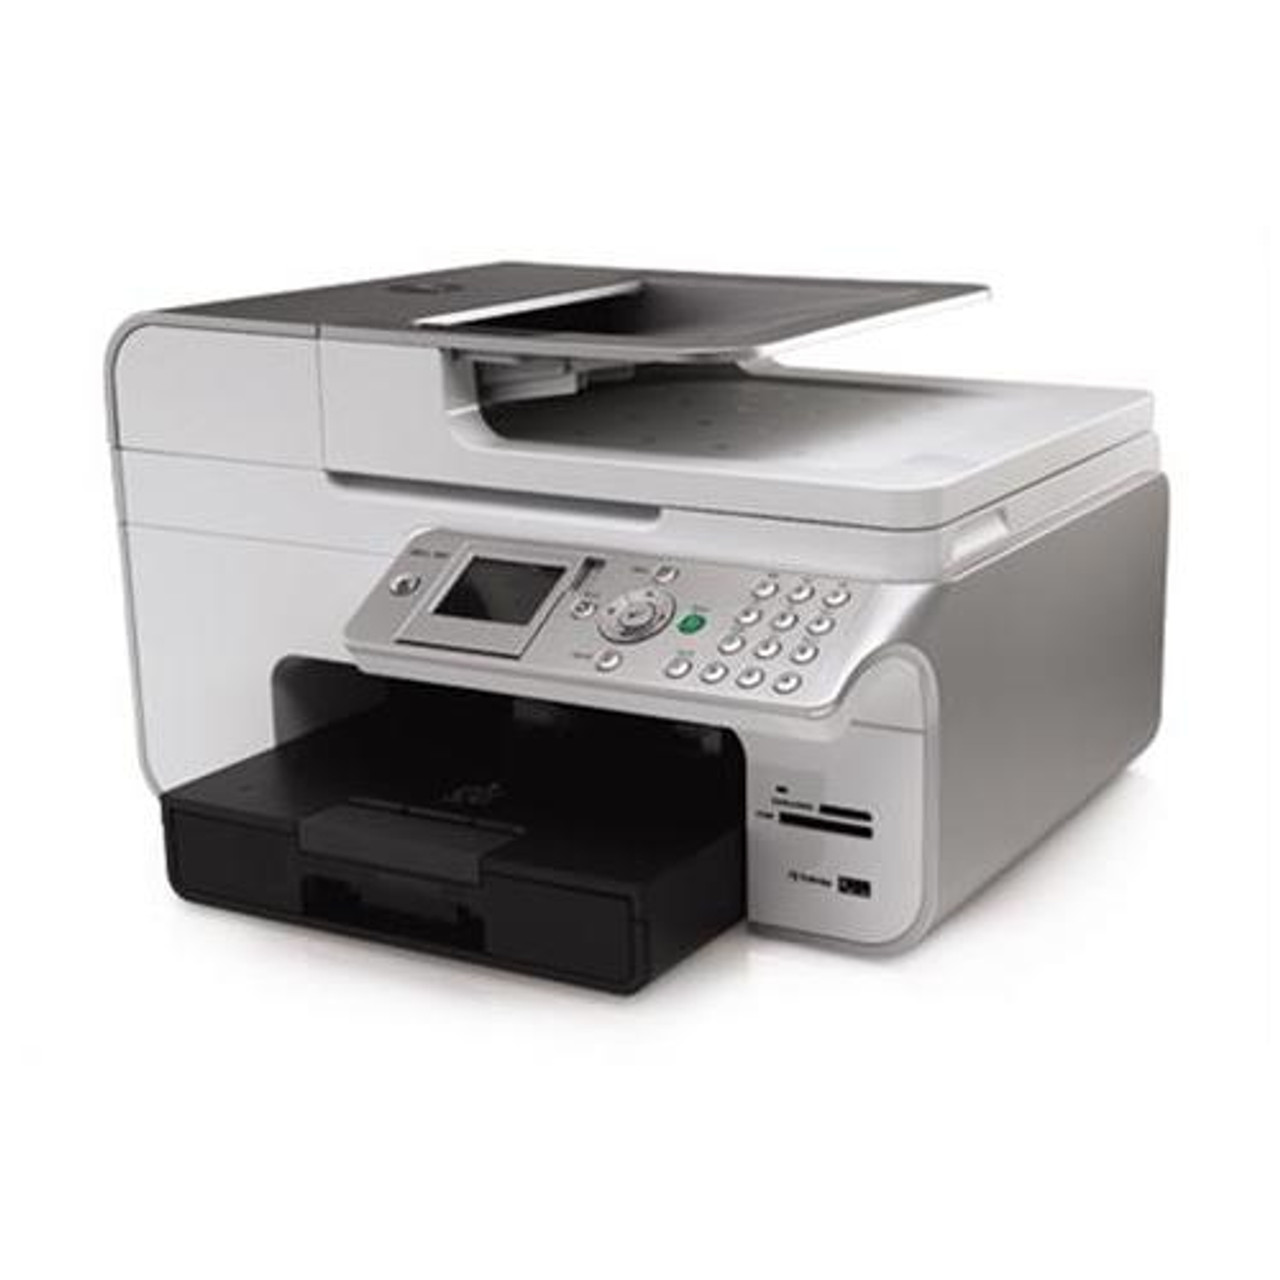 44220D1RFB - Dell Photo 966 All-In-One Printer (Refurbished)